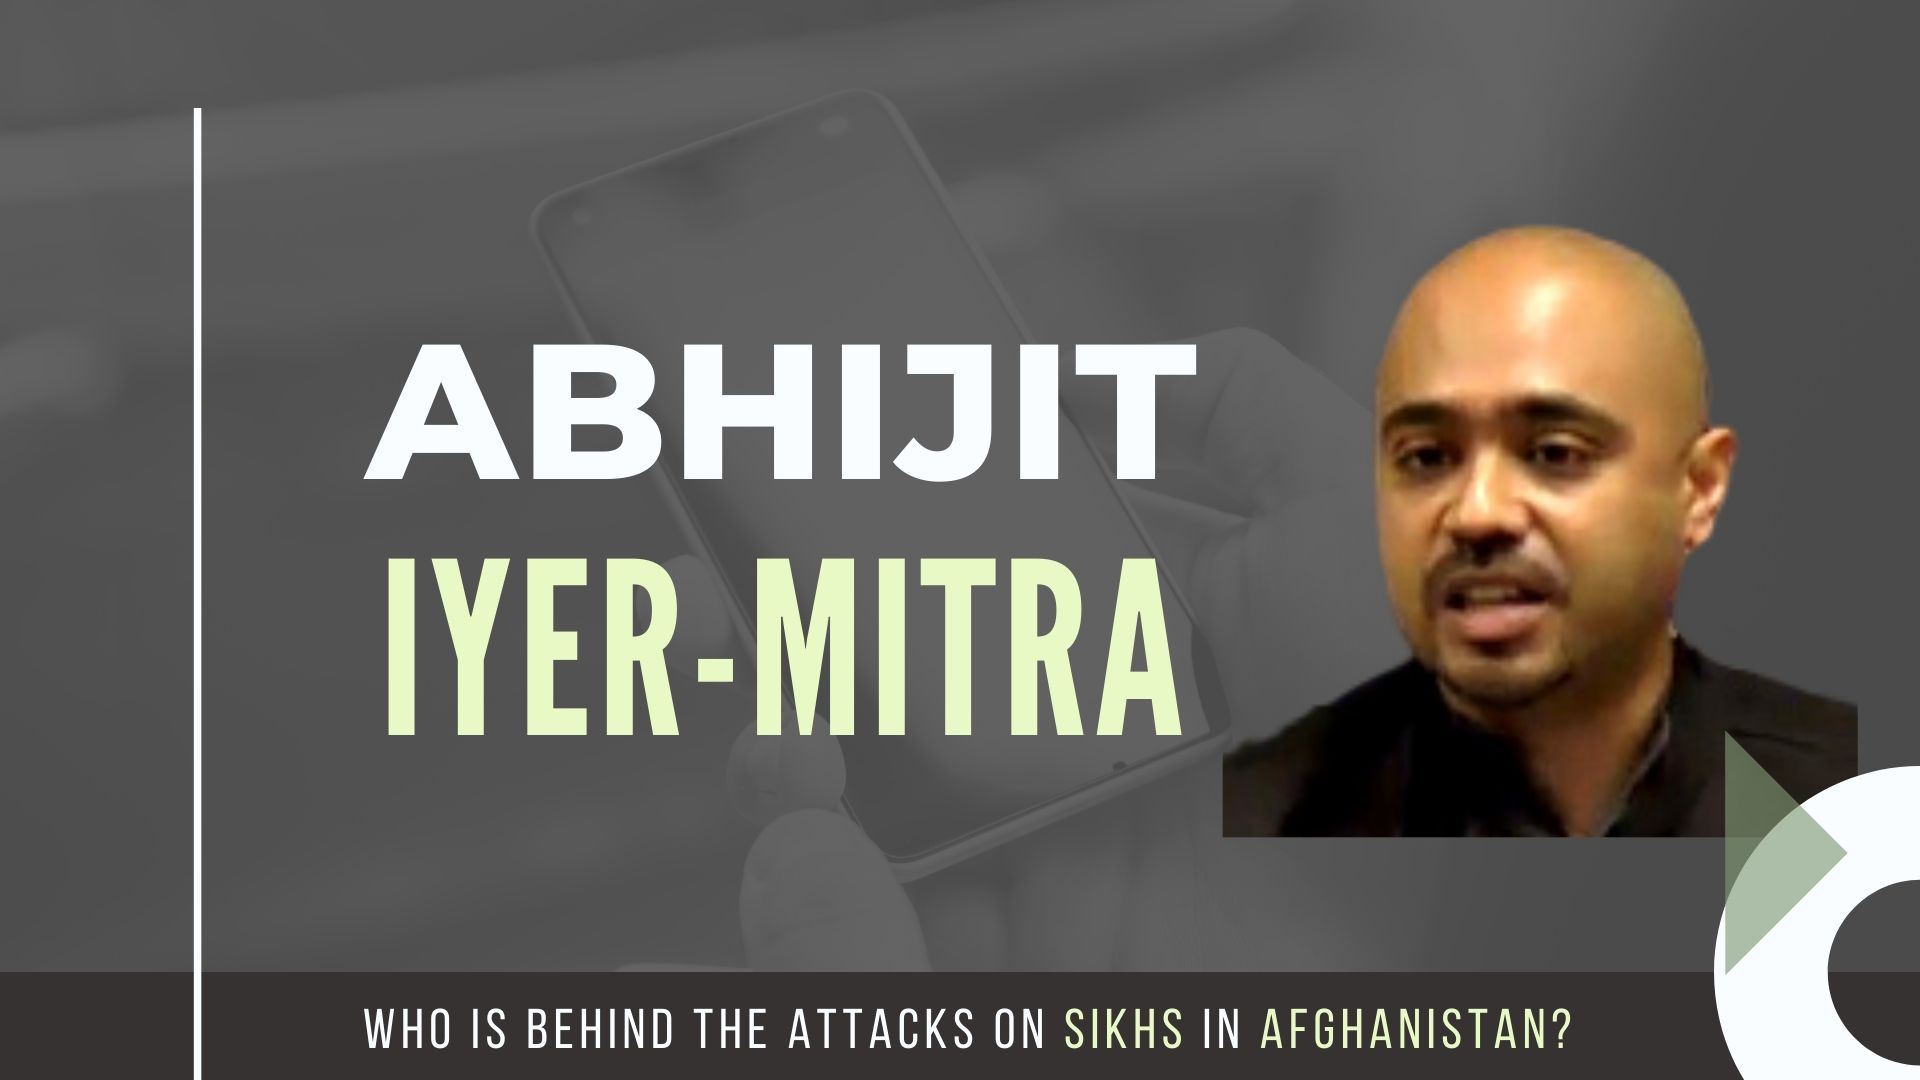 Abhijit Iyer-Mitra asserts the role of Pak-based elements in Sikh attack. Brushing aside the claims of ISIS, he explains who did the recent attack on a Sikh gurdwara in Afghanistan and why.